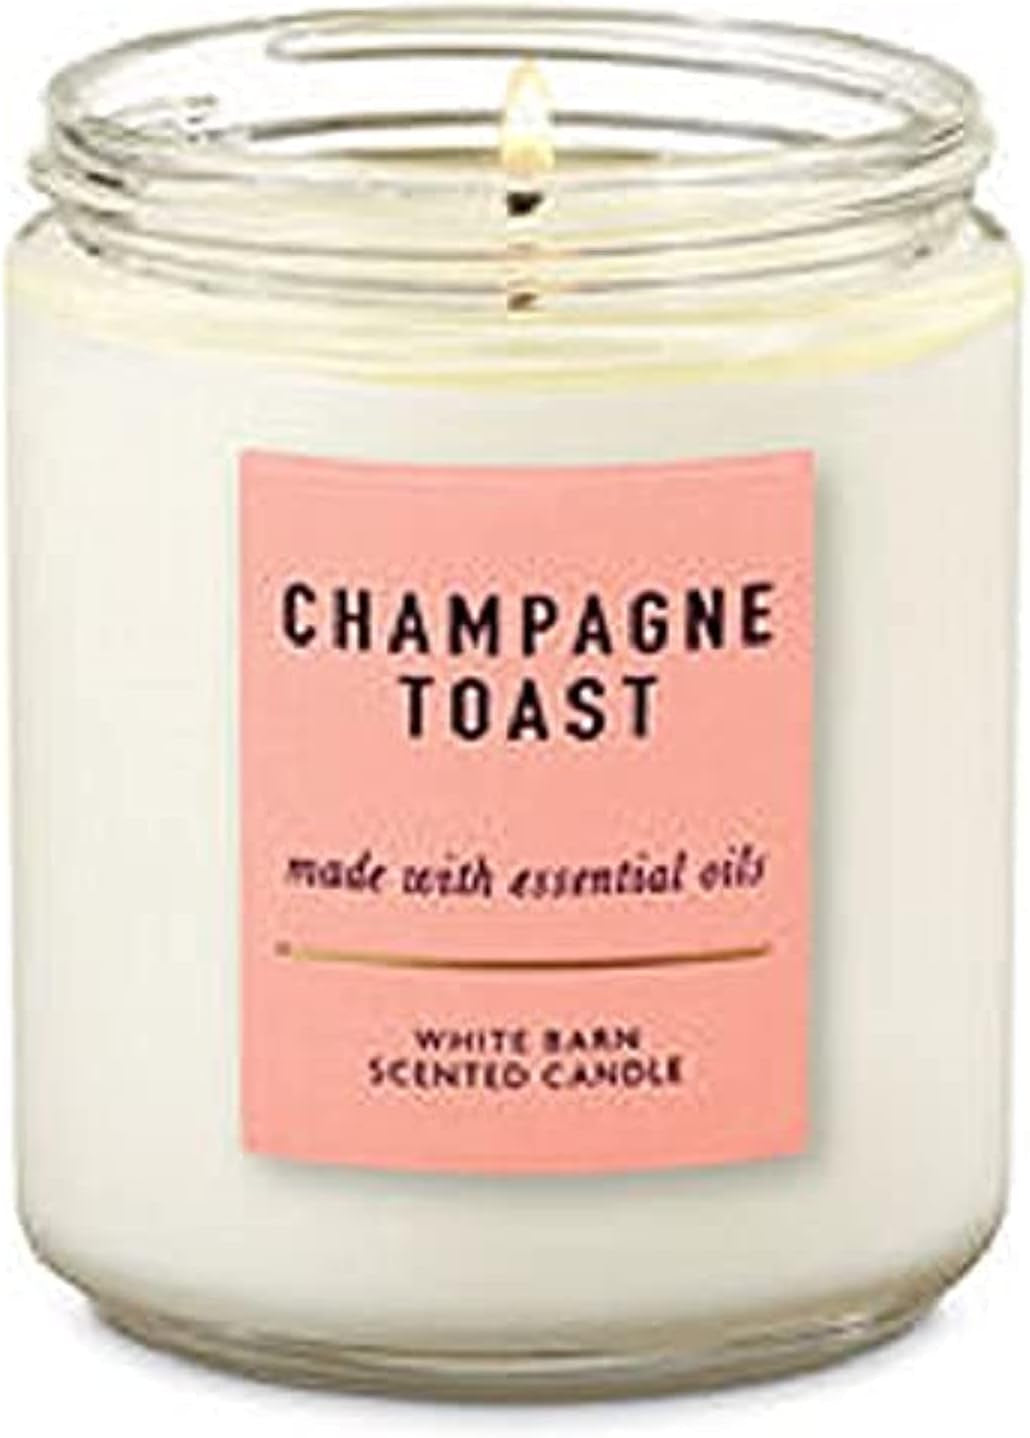 Bath & Body Works Single Wick Scented Candle Champagne Toast (Champagne Toast) Packaging Varies